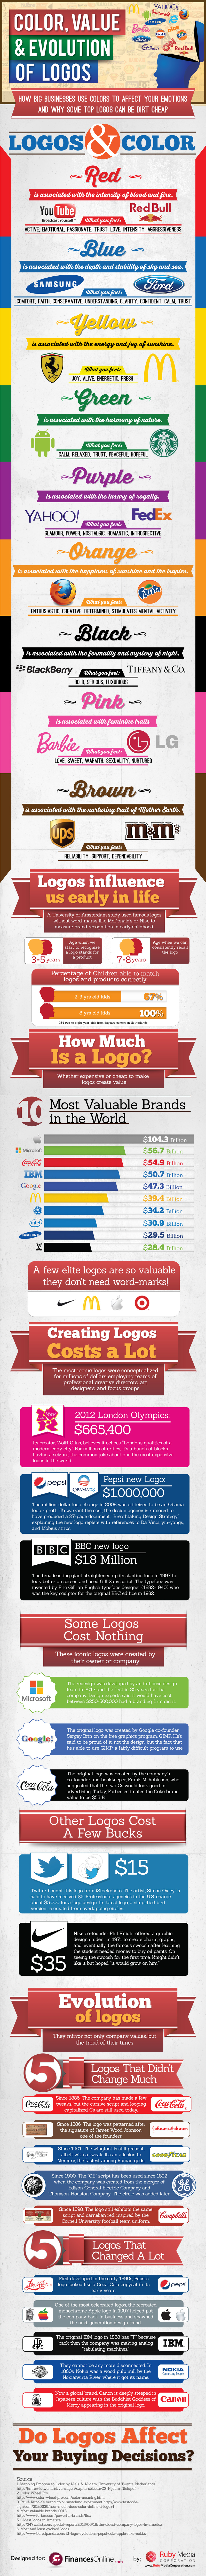 Clear infographic on logo value